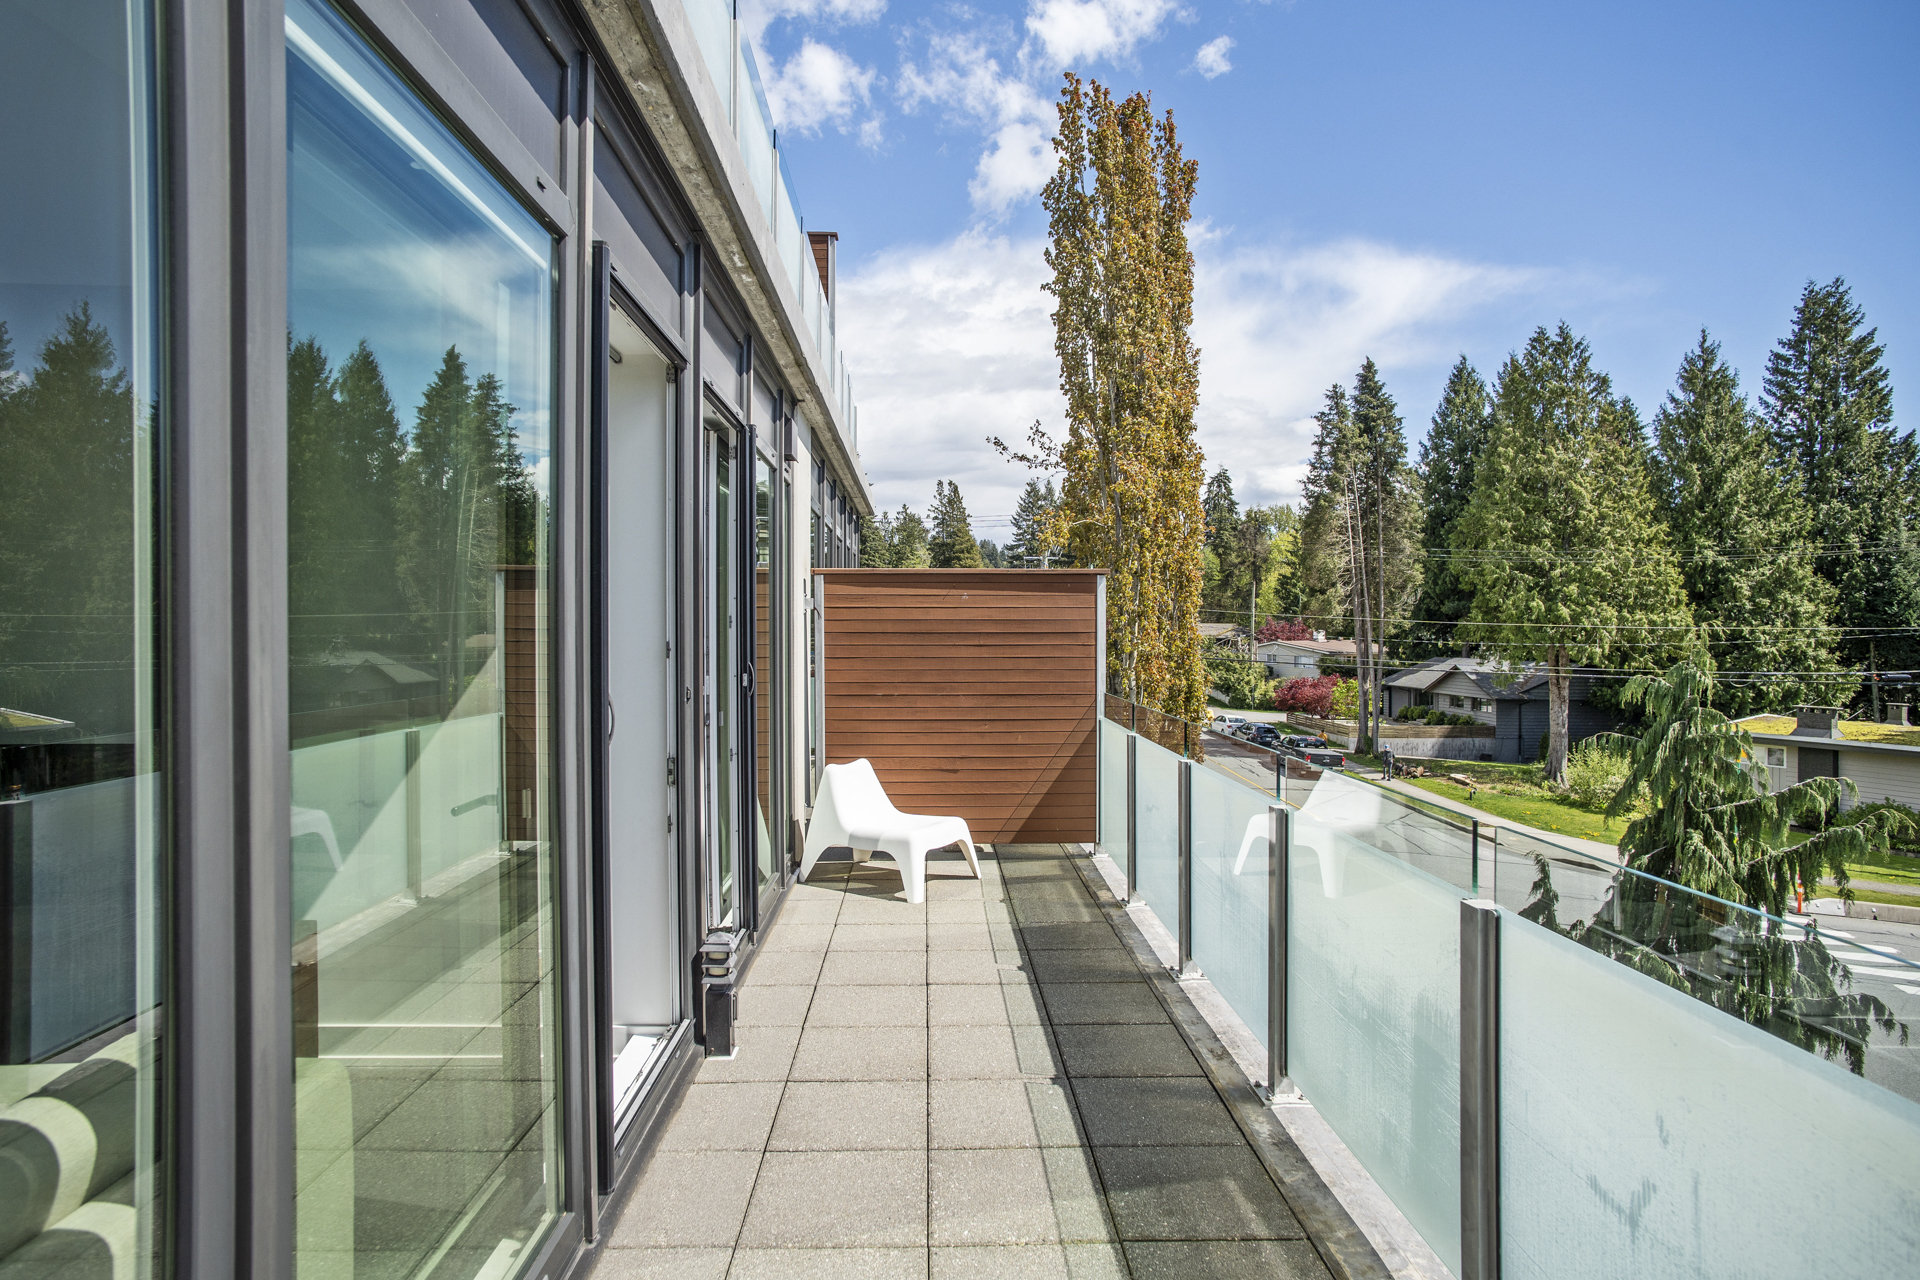 303 650 Evergreen Place, North Vancouver - For sale by Rossetti Realty - photo 1